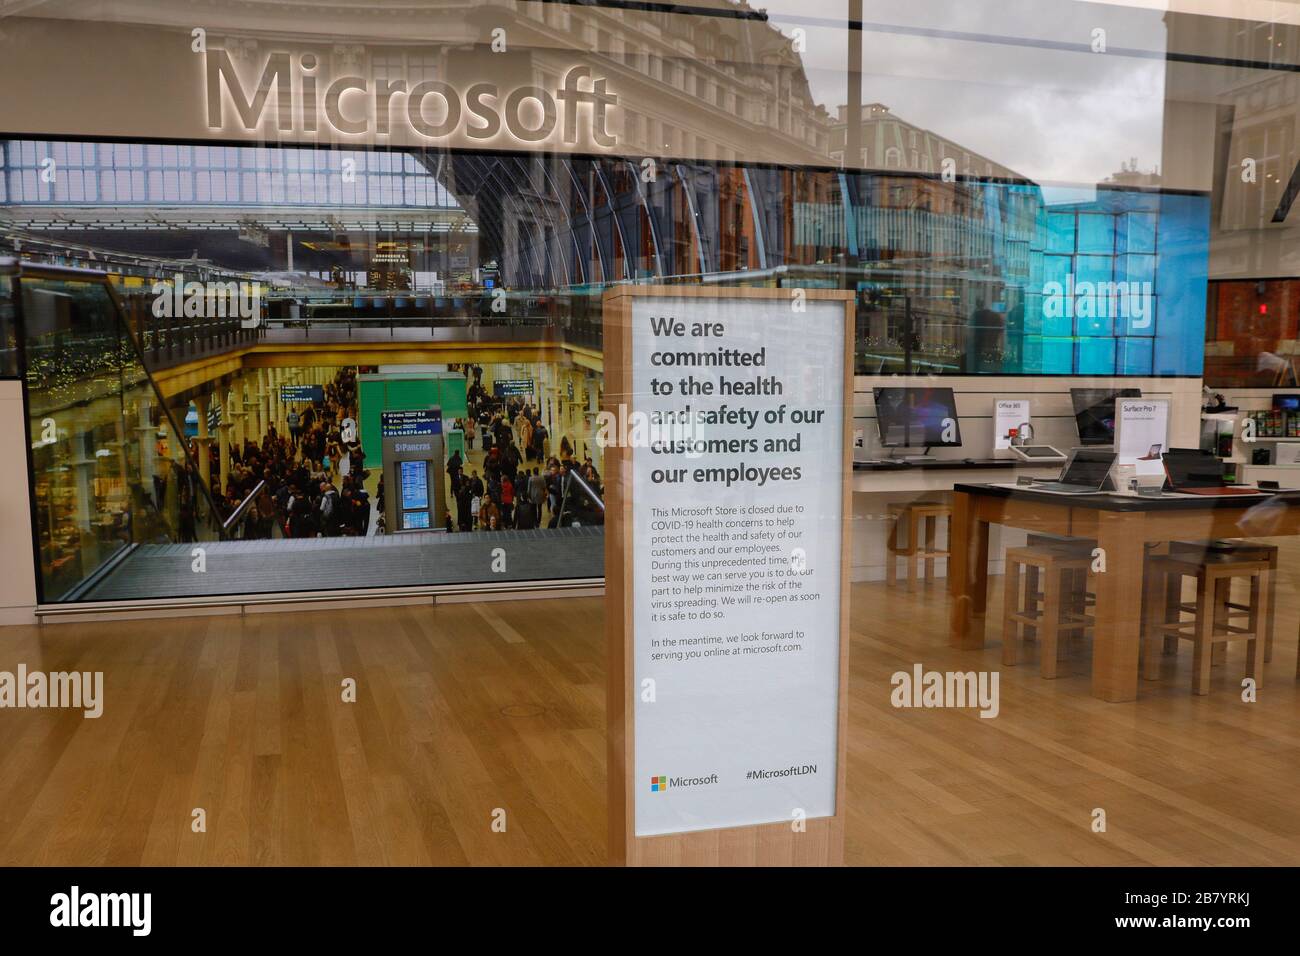 London, UK. 18th Mar, 2020. Photo taken on March 18, 2020 shows the closed Microsoft store at Oxford Circus in London, Britain. British Prime Minister Boris Johnson said Wednesday that all schools in the country will close from Friday after health authorities confirmed a death toll of 104 and a total of 2,626 infected cases of the novel coronavirus across the country. Credit: Tim Ireland/Xinhua/Alamy Live News Stock Photo